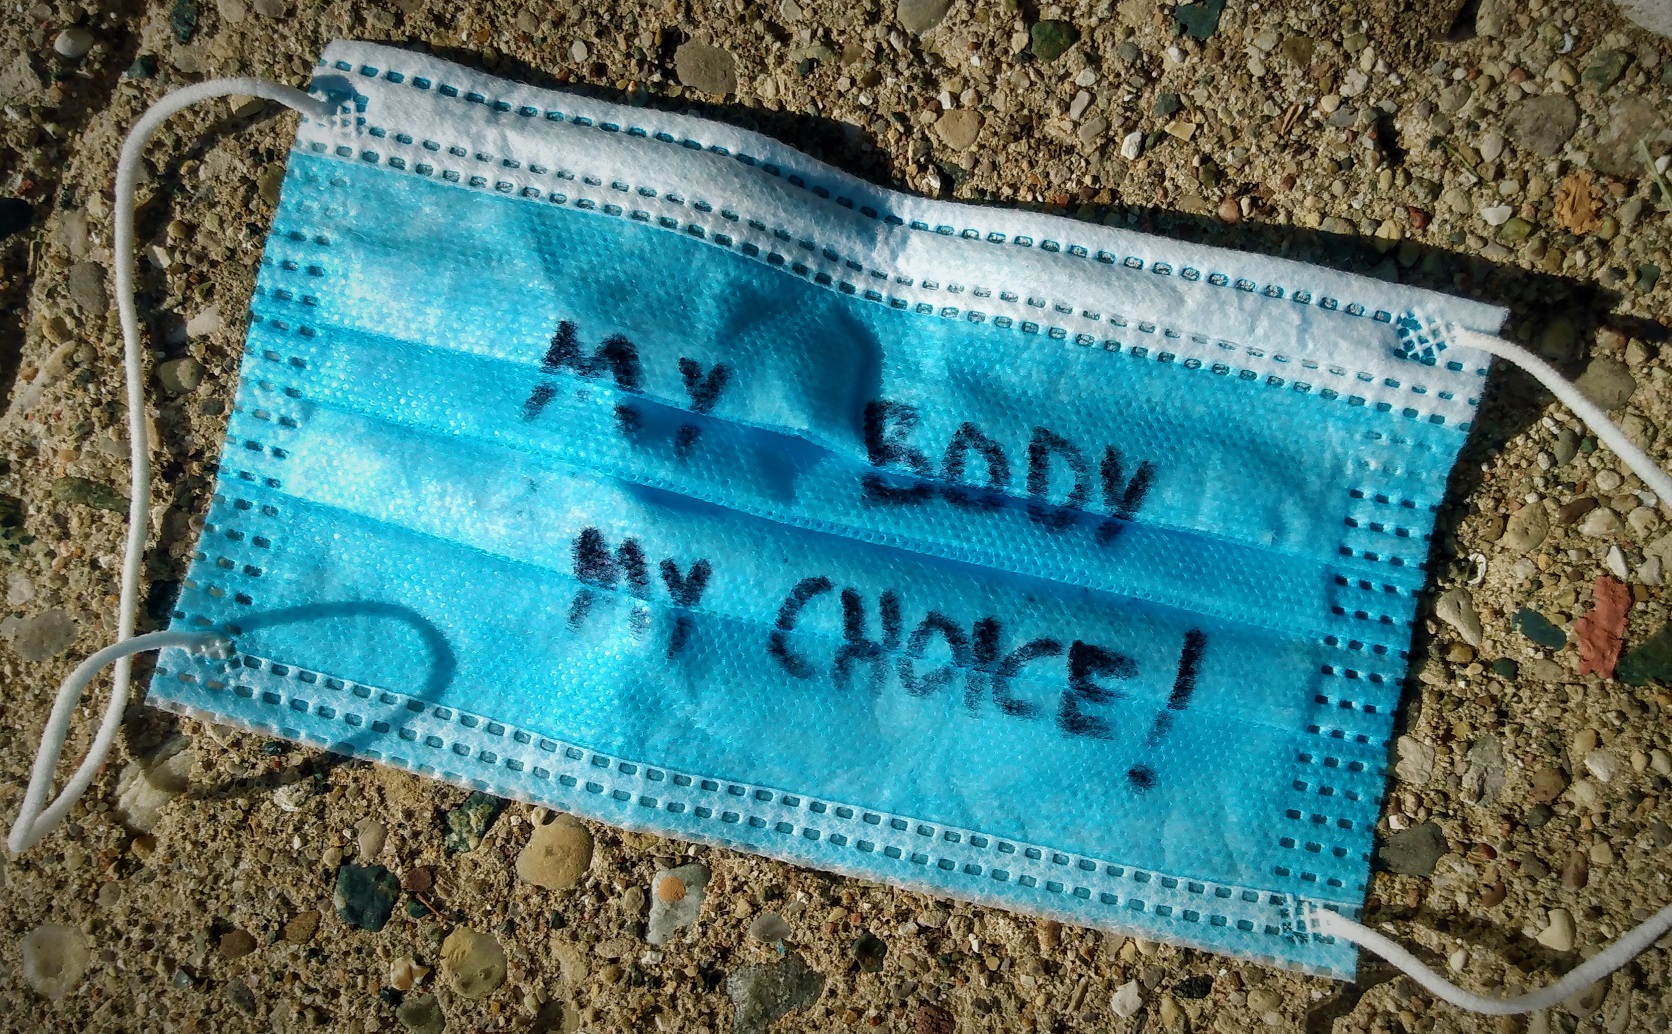 A discarded medical face mask laying on the pavement. It says, "My Body, My Choice!"